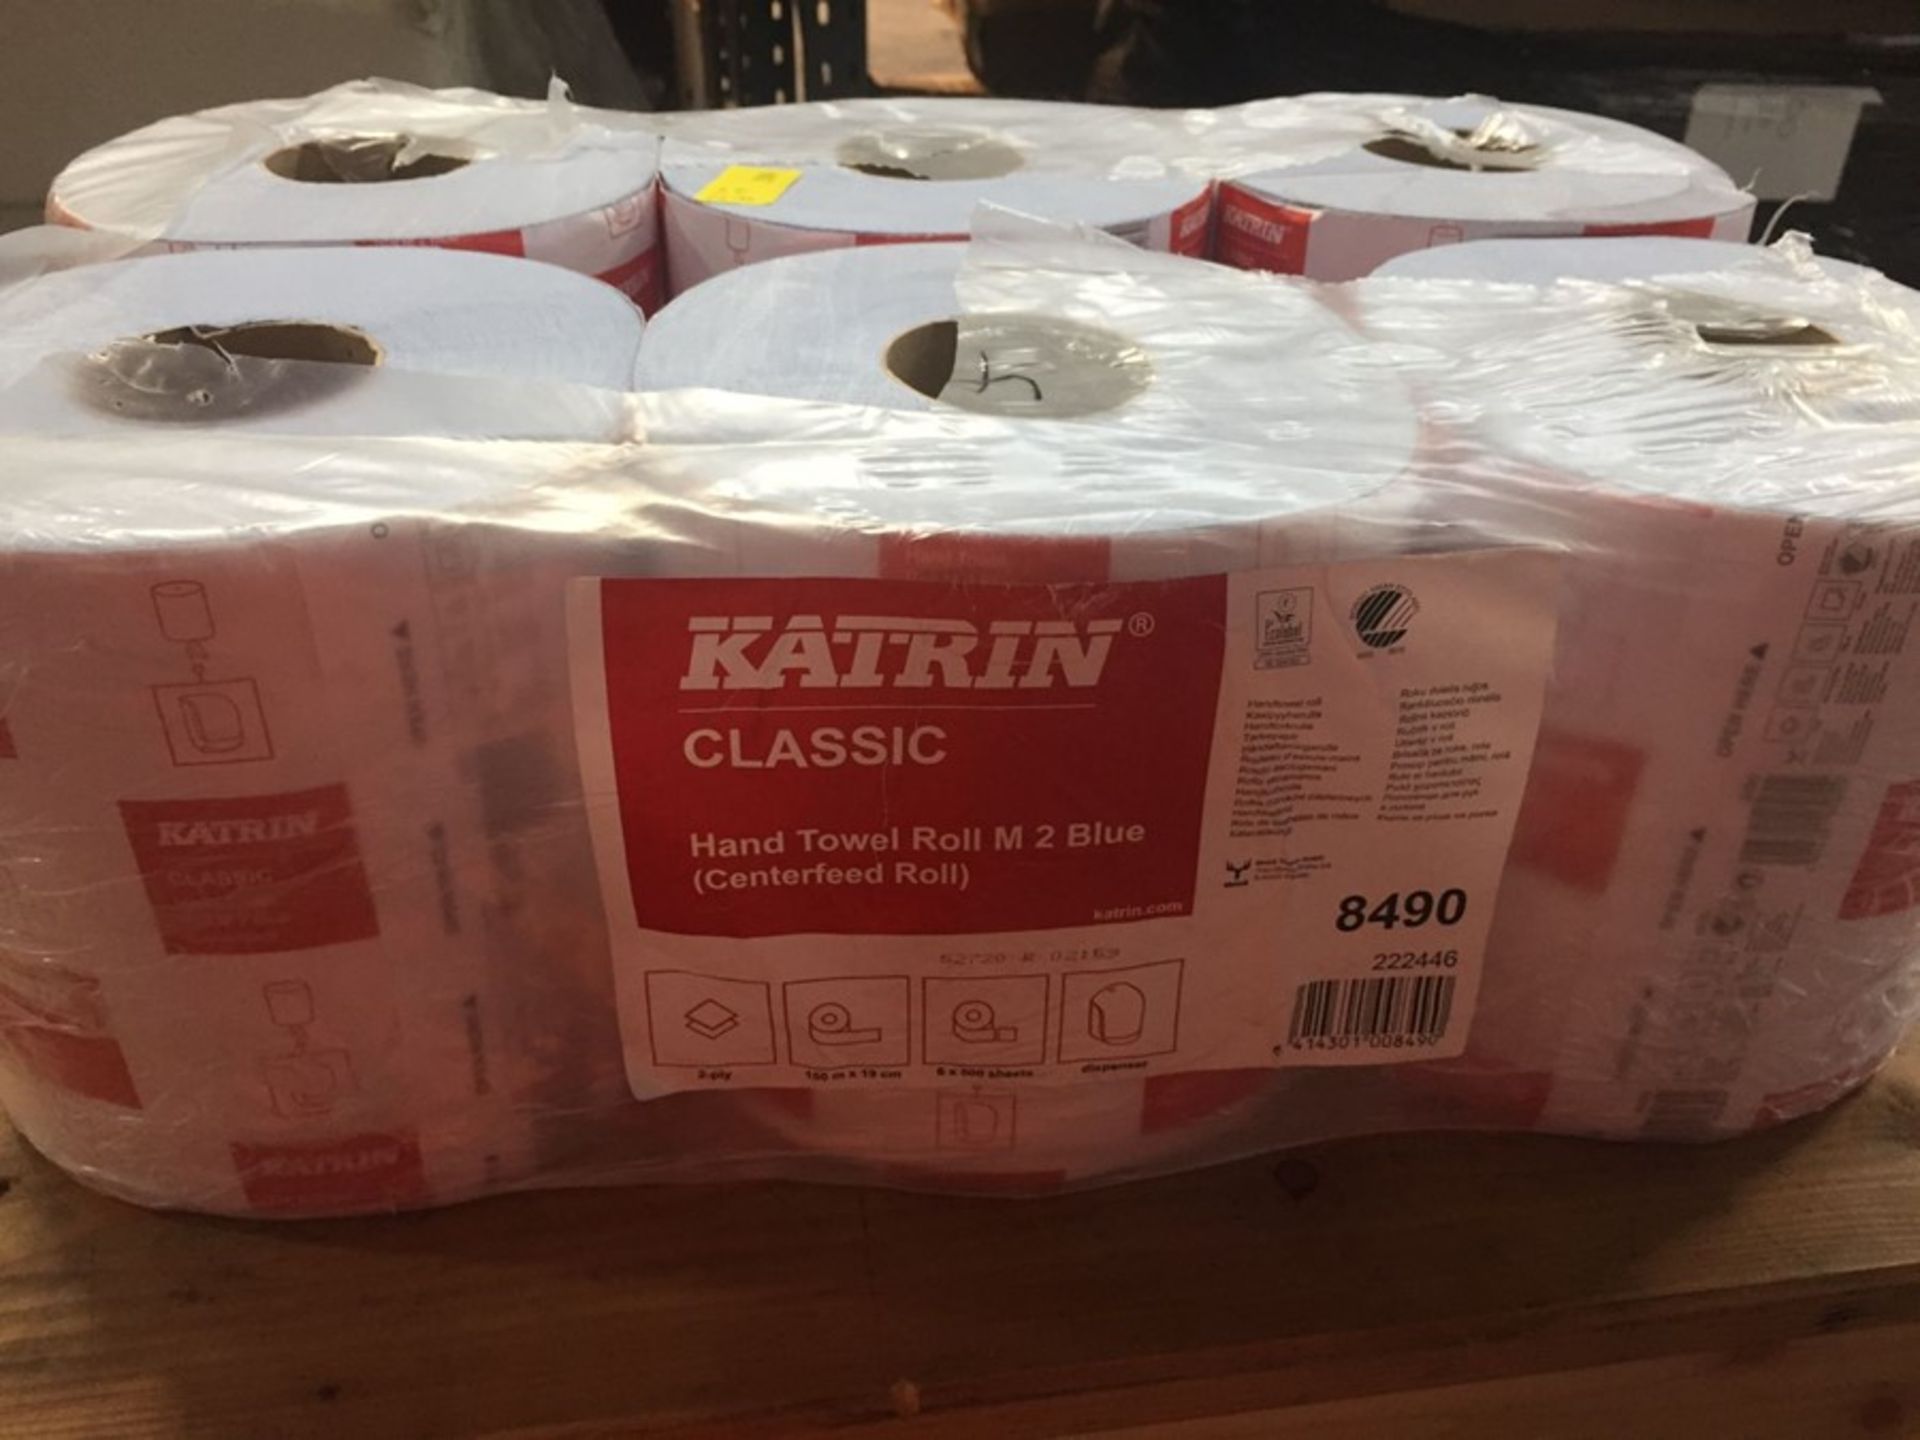 1 LOT TO CONTAIN A PACK OF 6 ROLLS OF KATRIN CLASSIC HAND TOWEL ROLL M 2 BLUE - L7